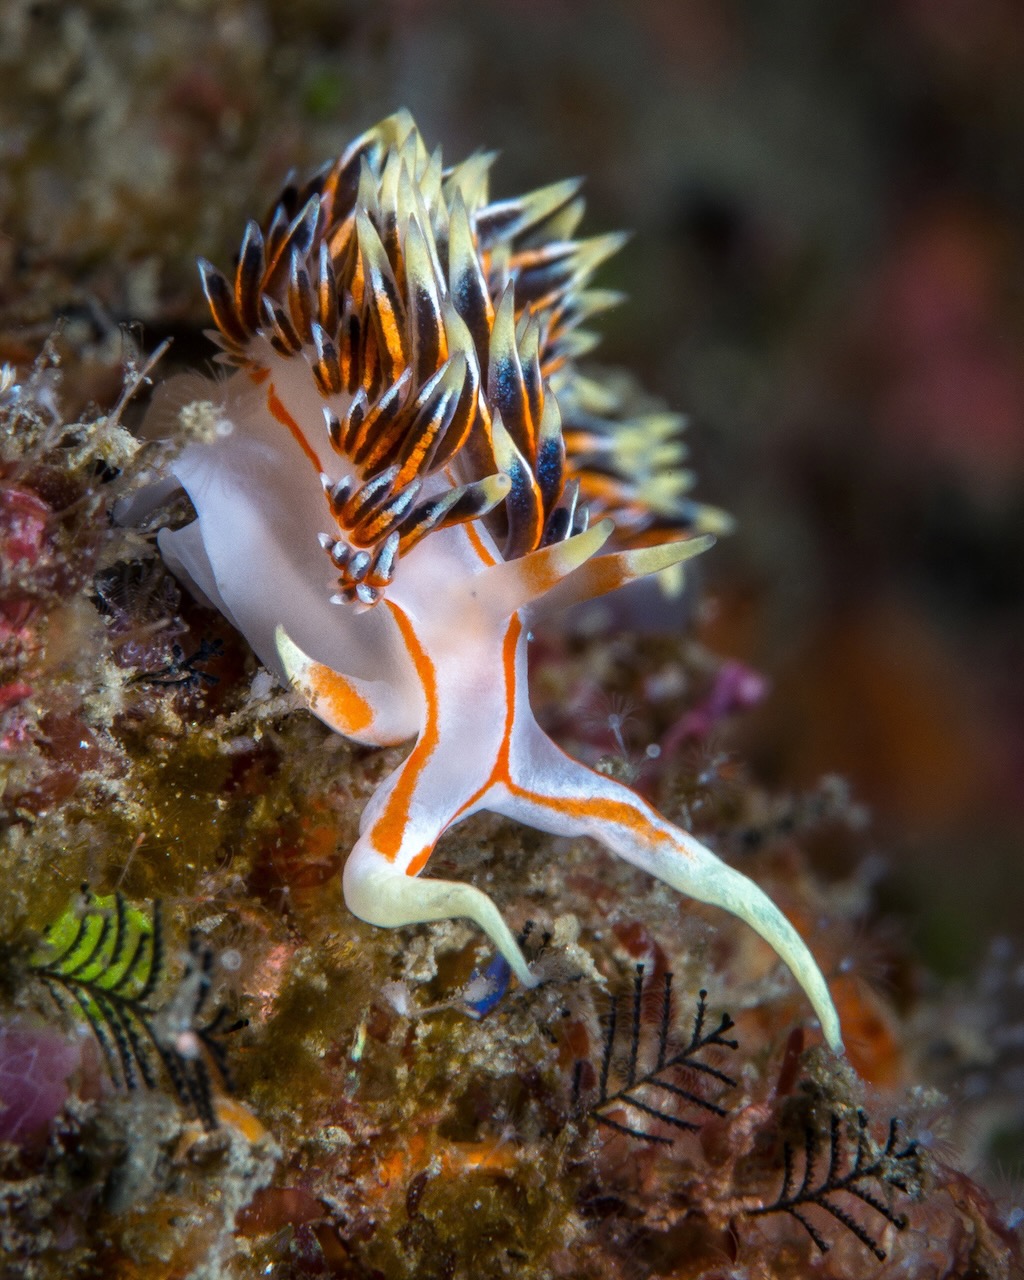 Caloria Aeolid Nudibranch (photo by Wesley Oosthuizen)